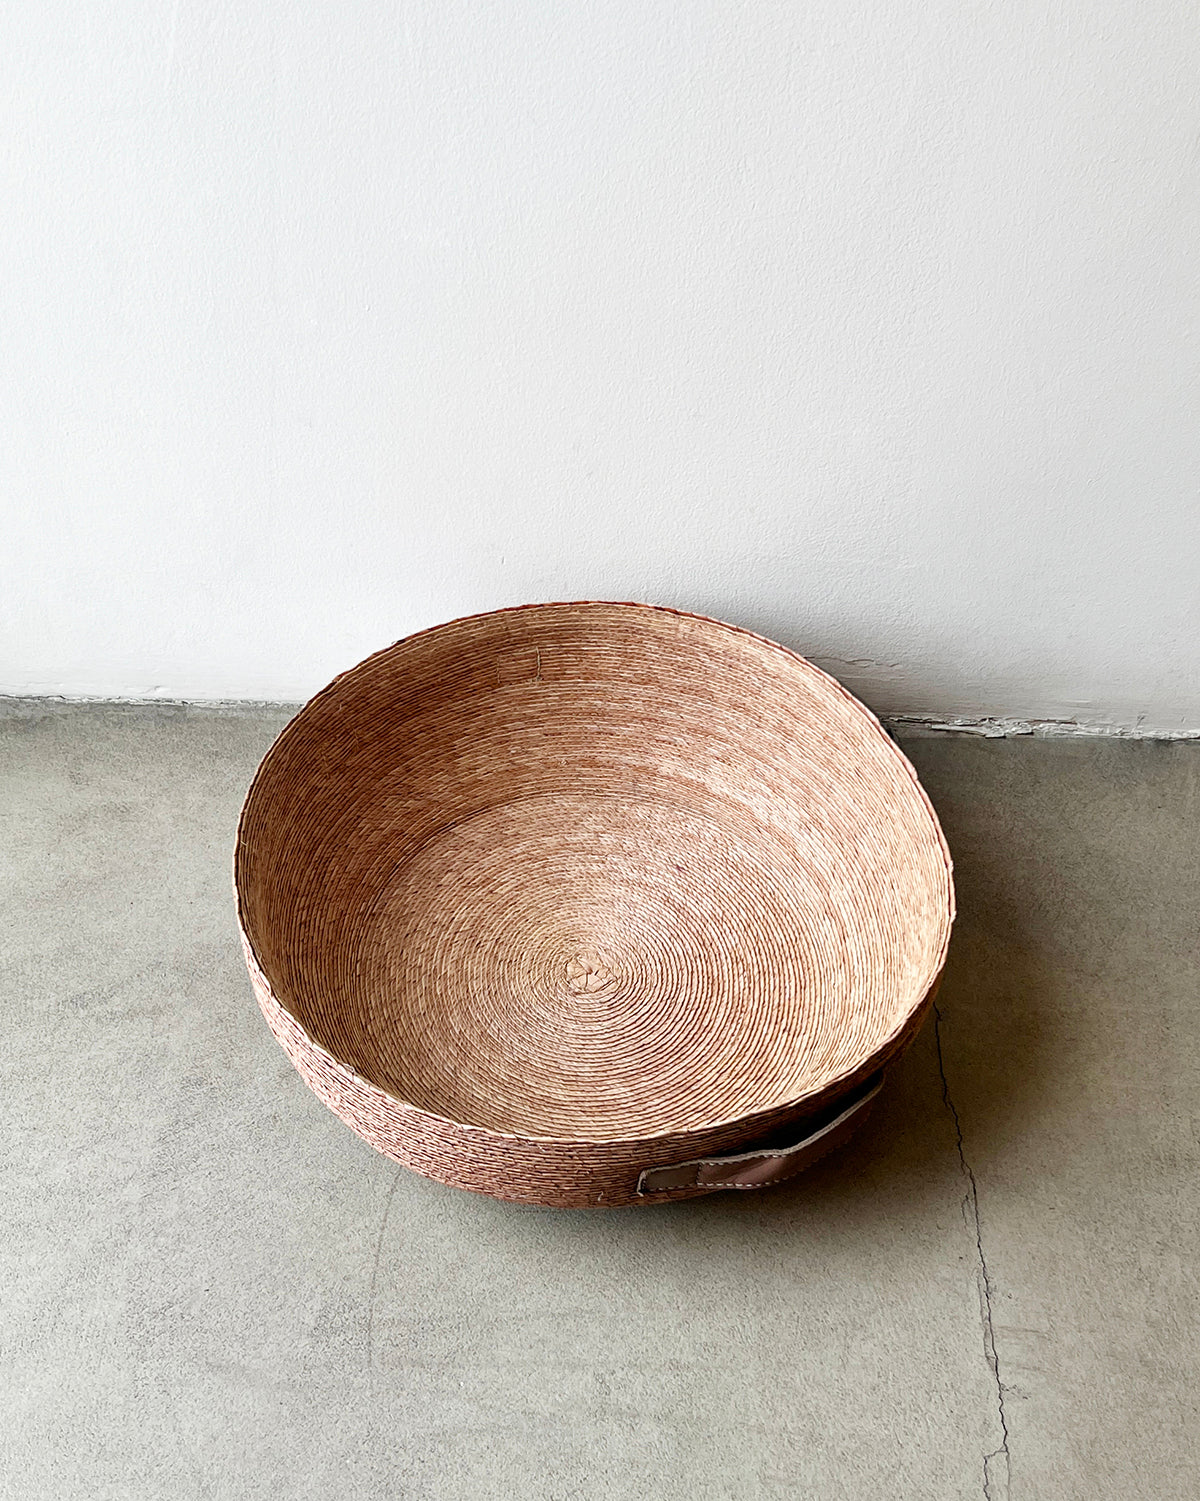 Handwoven Natural Palm Round Nido Basket with Leather Handles